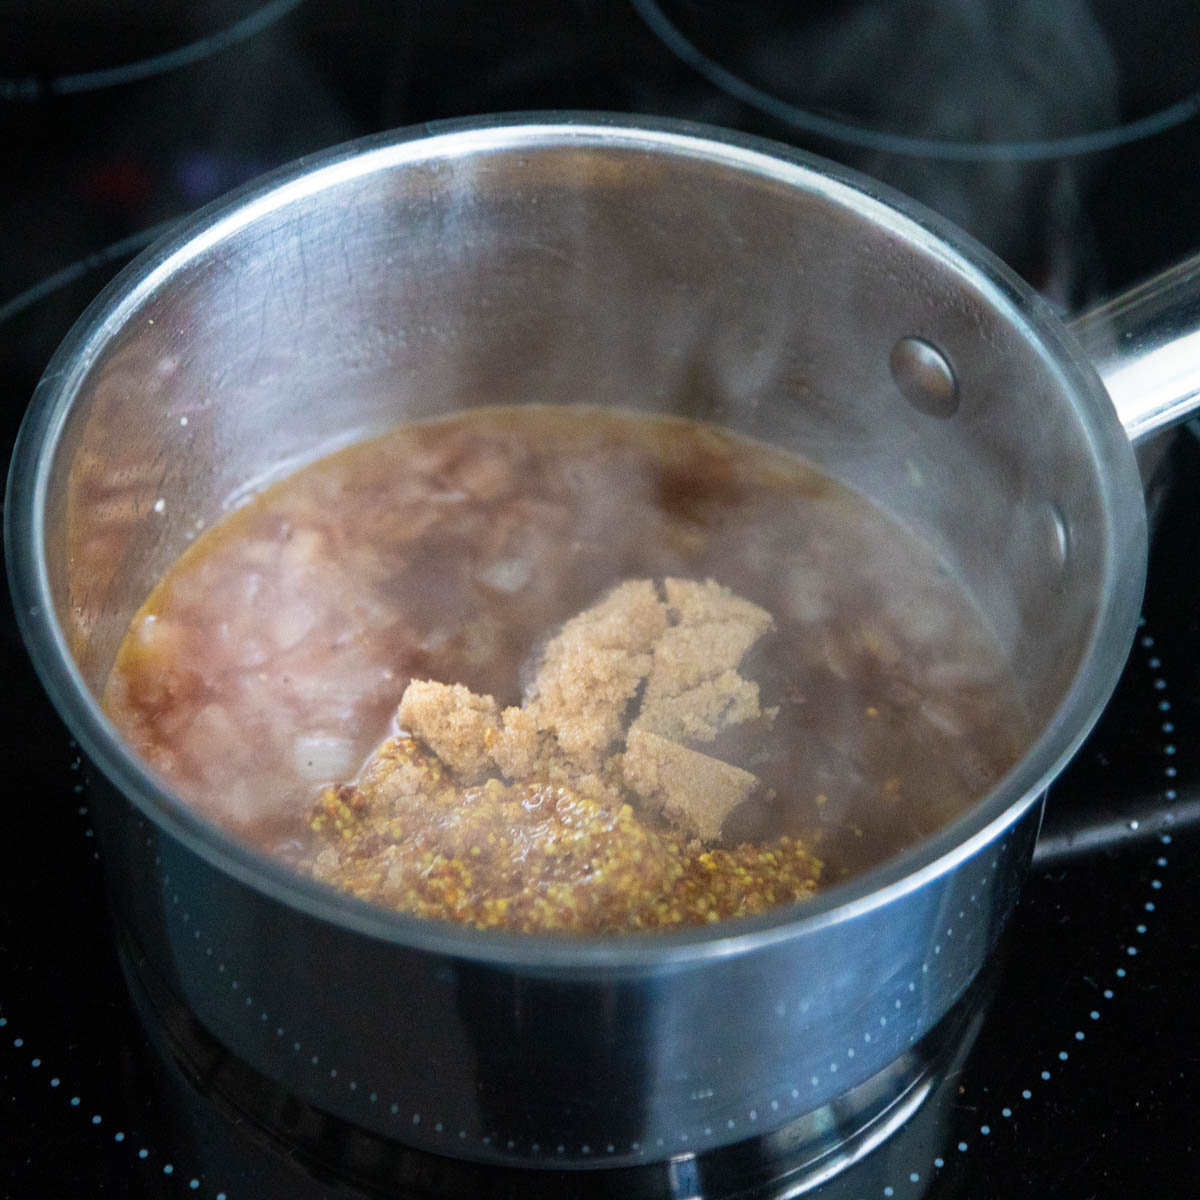 The brown sugar and mustard are cooking together in a saucepan on the stovetop.